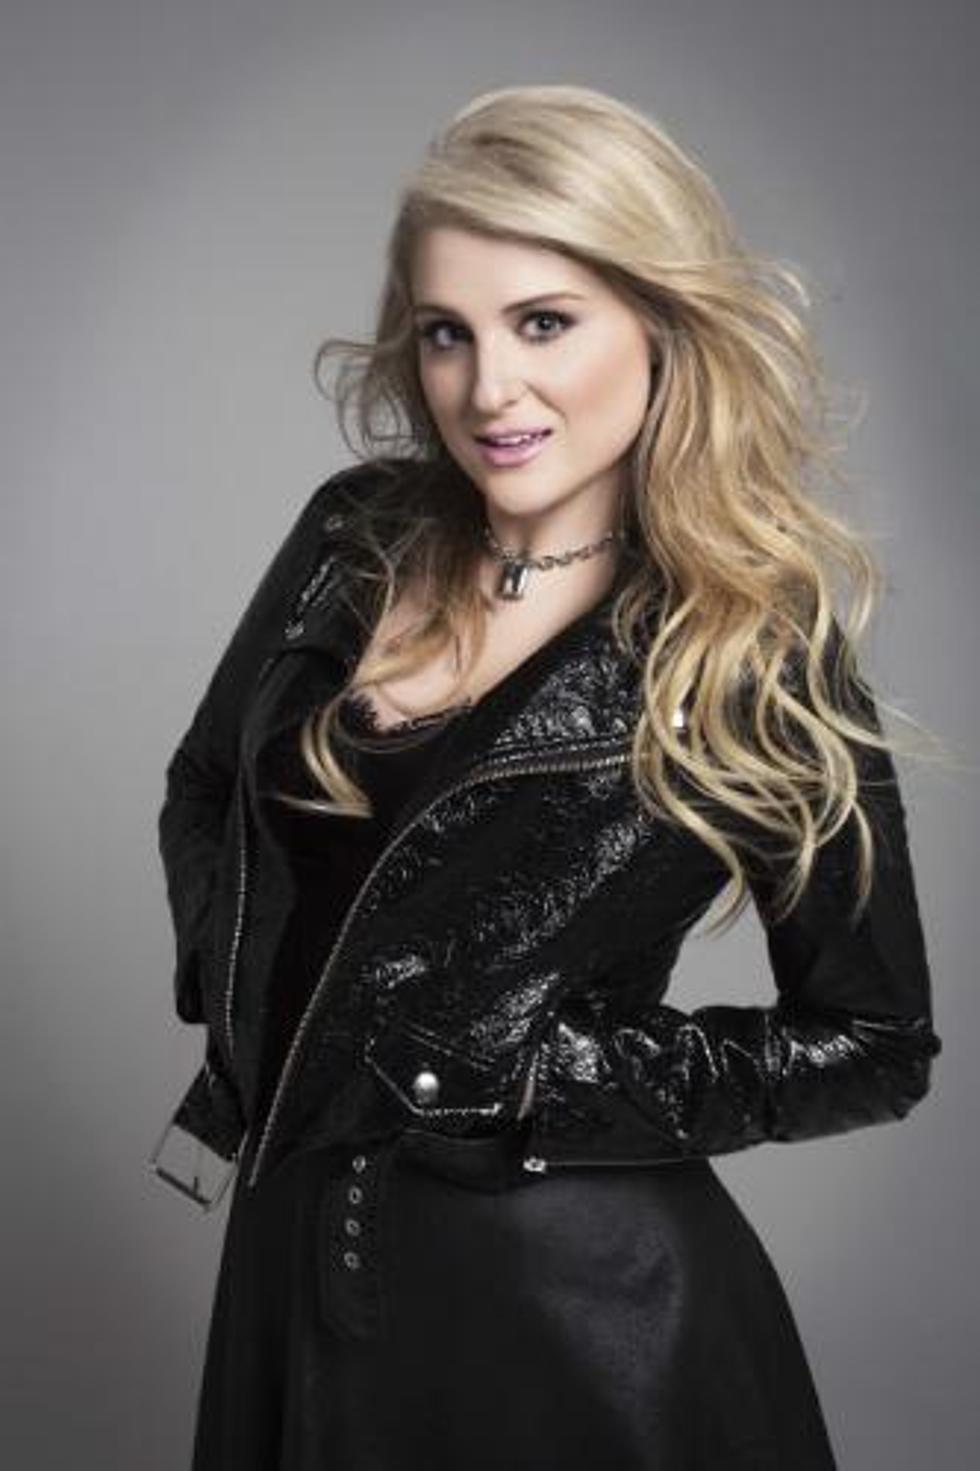 Meghan Trainor Does Title Track for Epic Records&#8217; First Holiday EP &#8216;I&#8217;ll Be Home For Christmas&#8217;